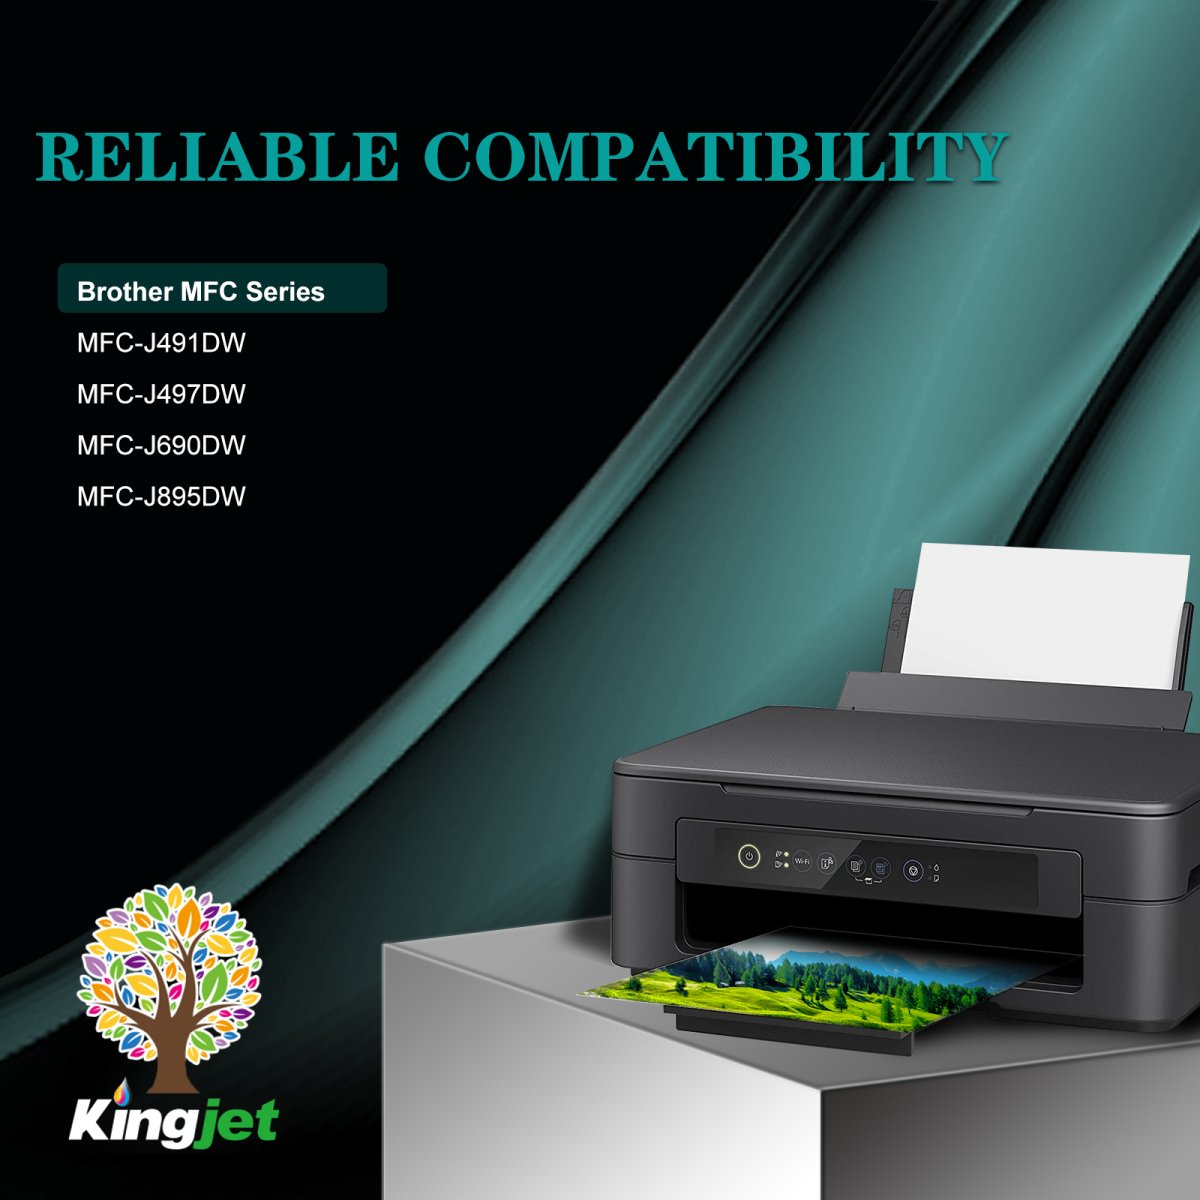 Kingjet LC3013 Ink Cartridges BK/C/M/Y Replacement for Brother LC3013 LC3011 LC 3013 LC 3011 Use with Brother MFC-J497DW MFC-J491DW MFC-J690DW MFC-J895DW Printers for Brother Ink Cartridges LC3013 - Linford Office:Printer Ink & Toner Cartridge